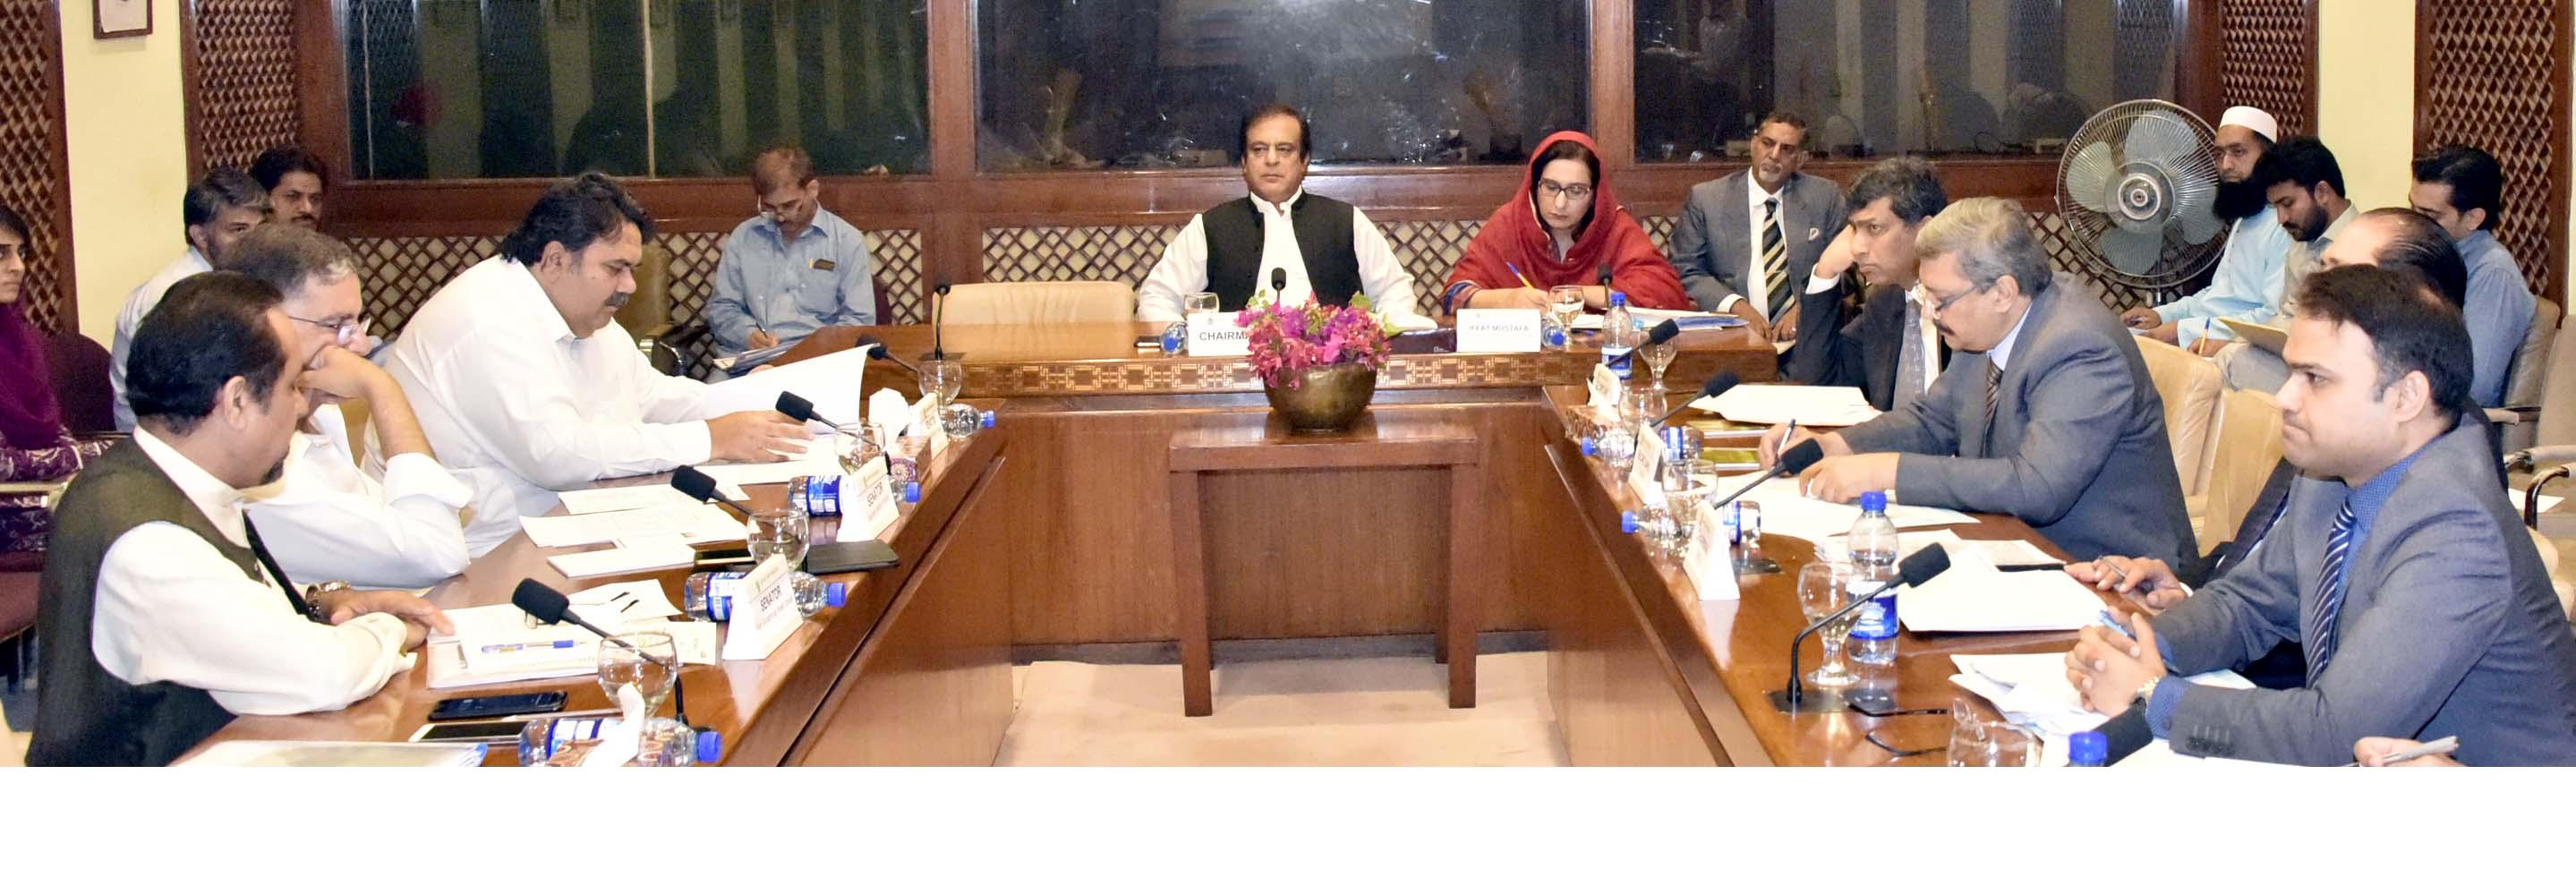 SENATOR SYED SHIBLI FARAZ, CHAIRMAN SENATE STANDING COMMITTEE ON COMMERCE AND TEXTILE INDUSTRY PRESIDING OVER A MEETING OF THE COMMITTEE AT PARLIAMENT HOUSE ISLAMABAD ON JULY 19, 2018.